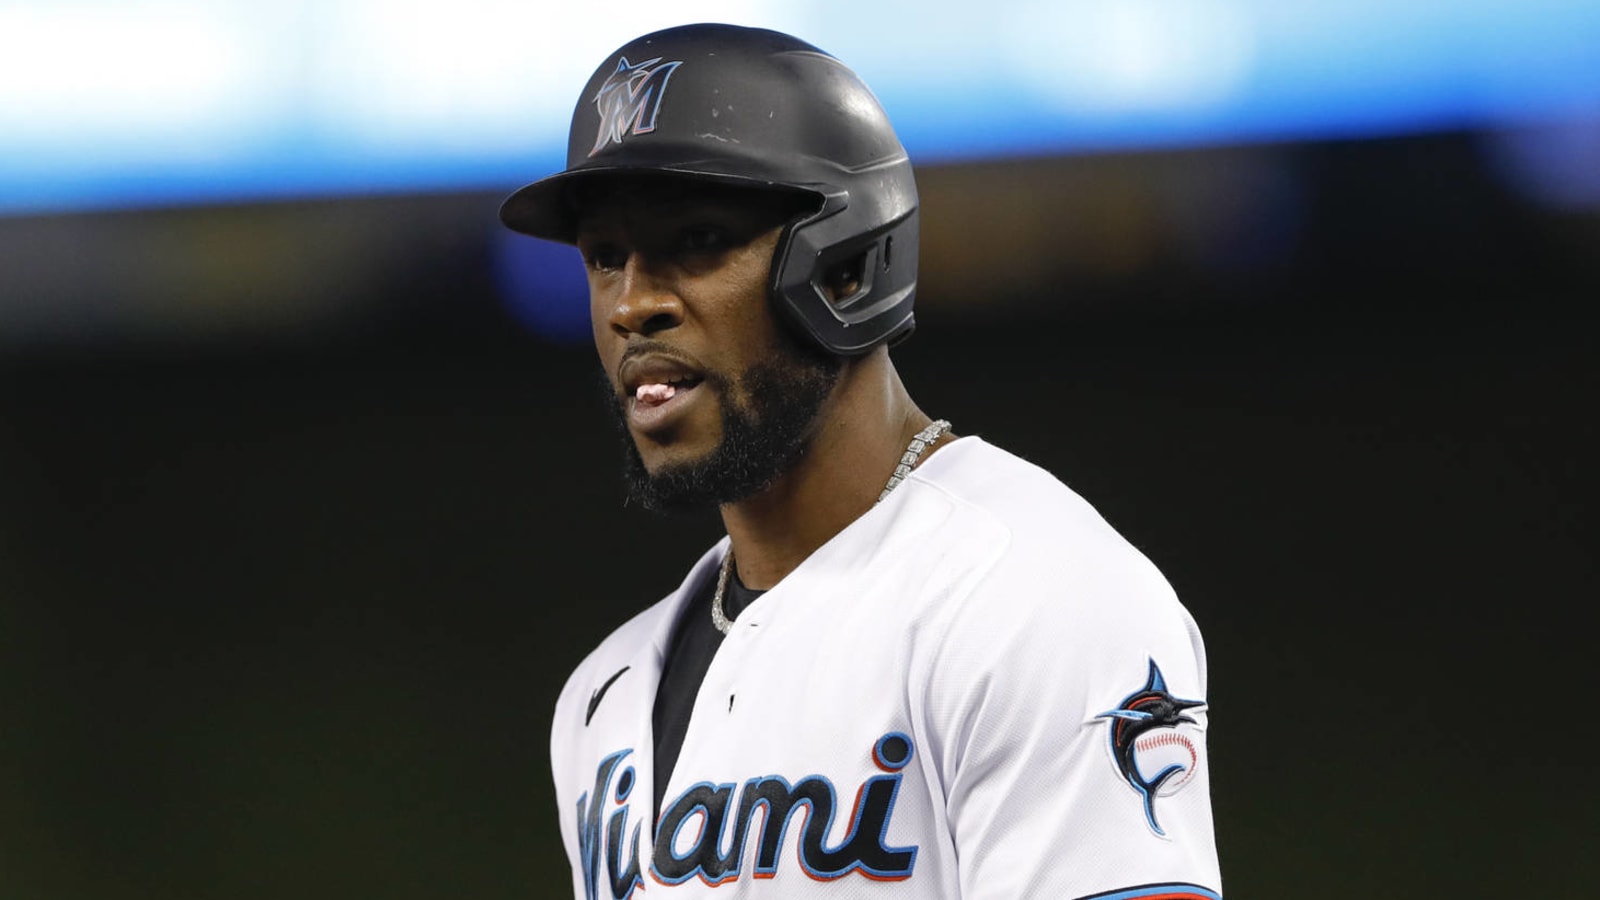 Starling Marte not in Marlins' lineup amid trade rumors